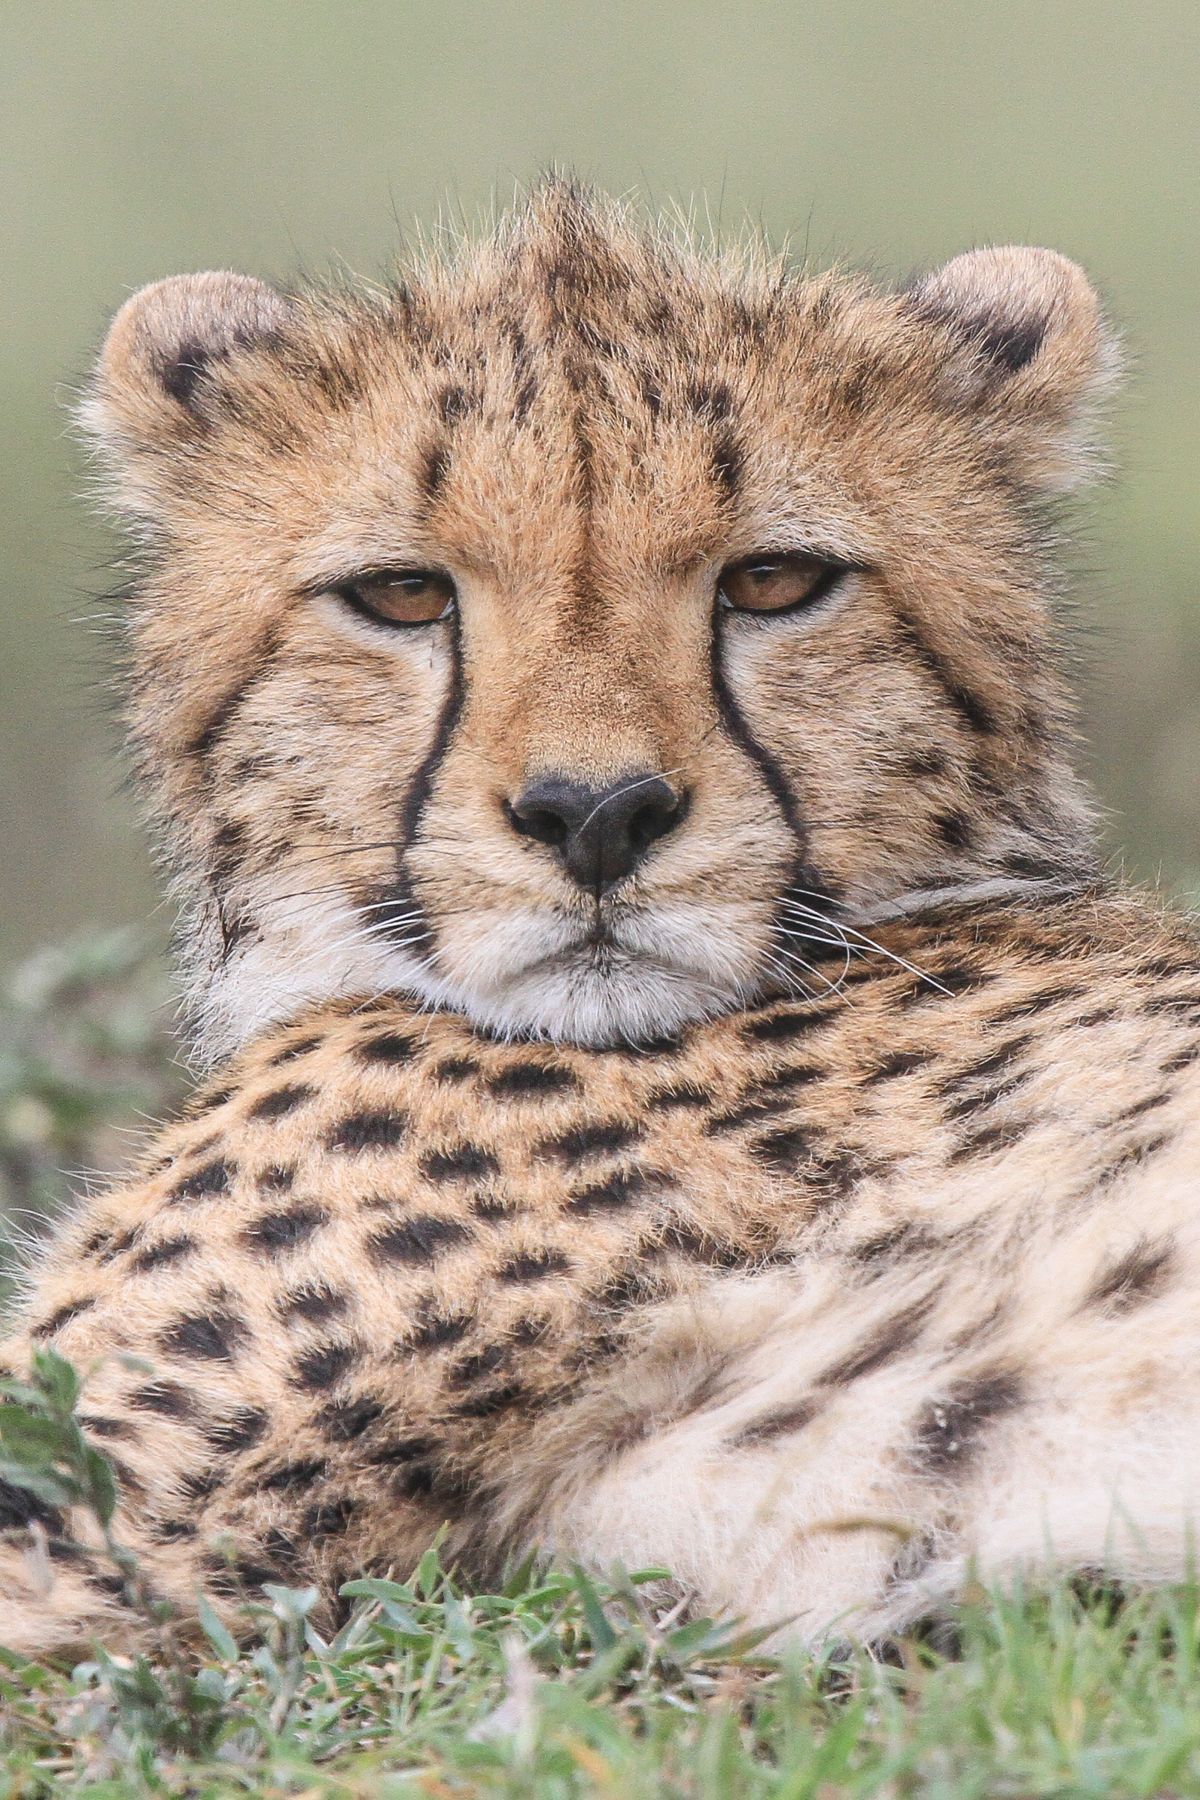 A lot of the Cheetah's day is spent resting, conserving energy before the next hunt